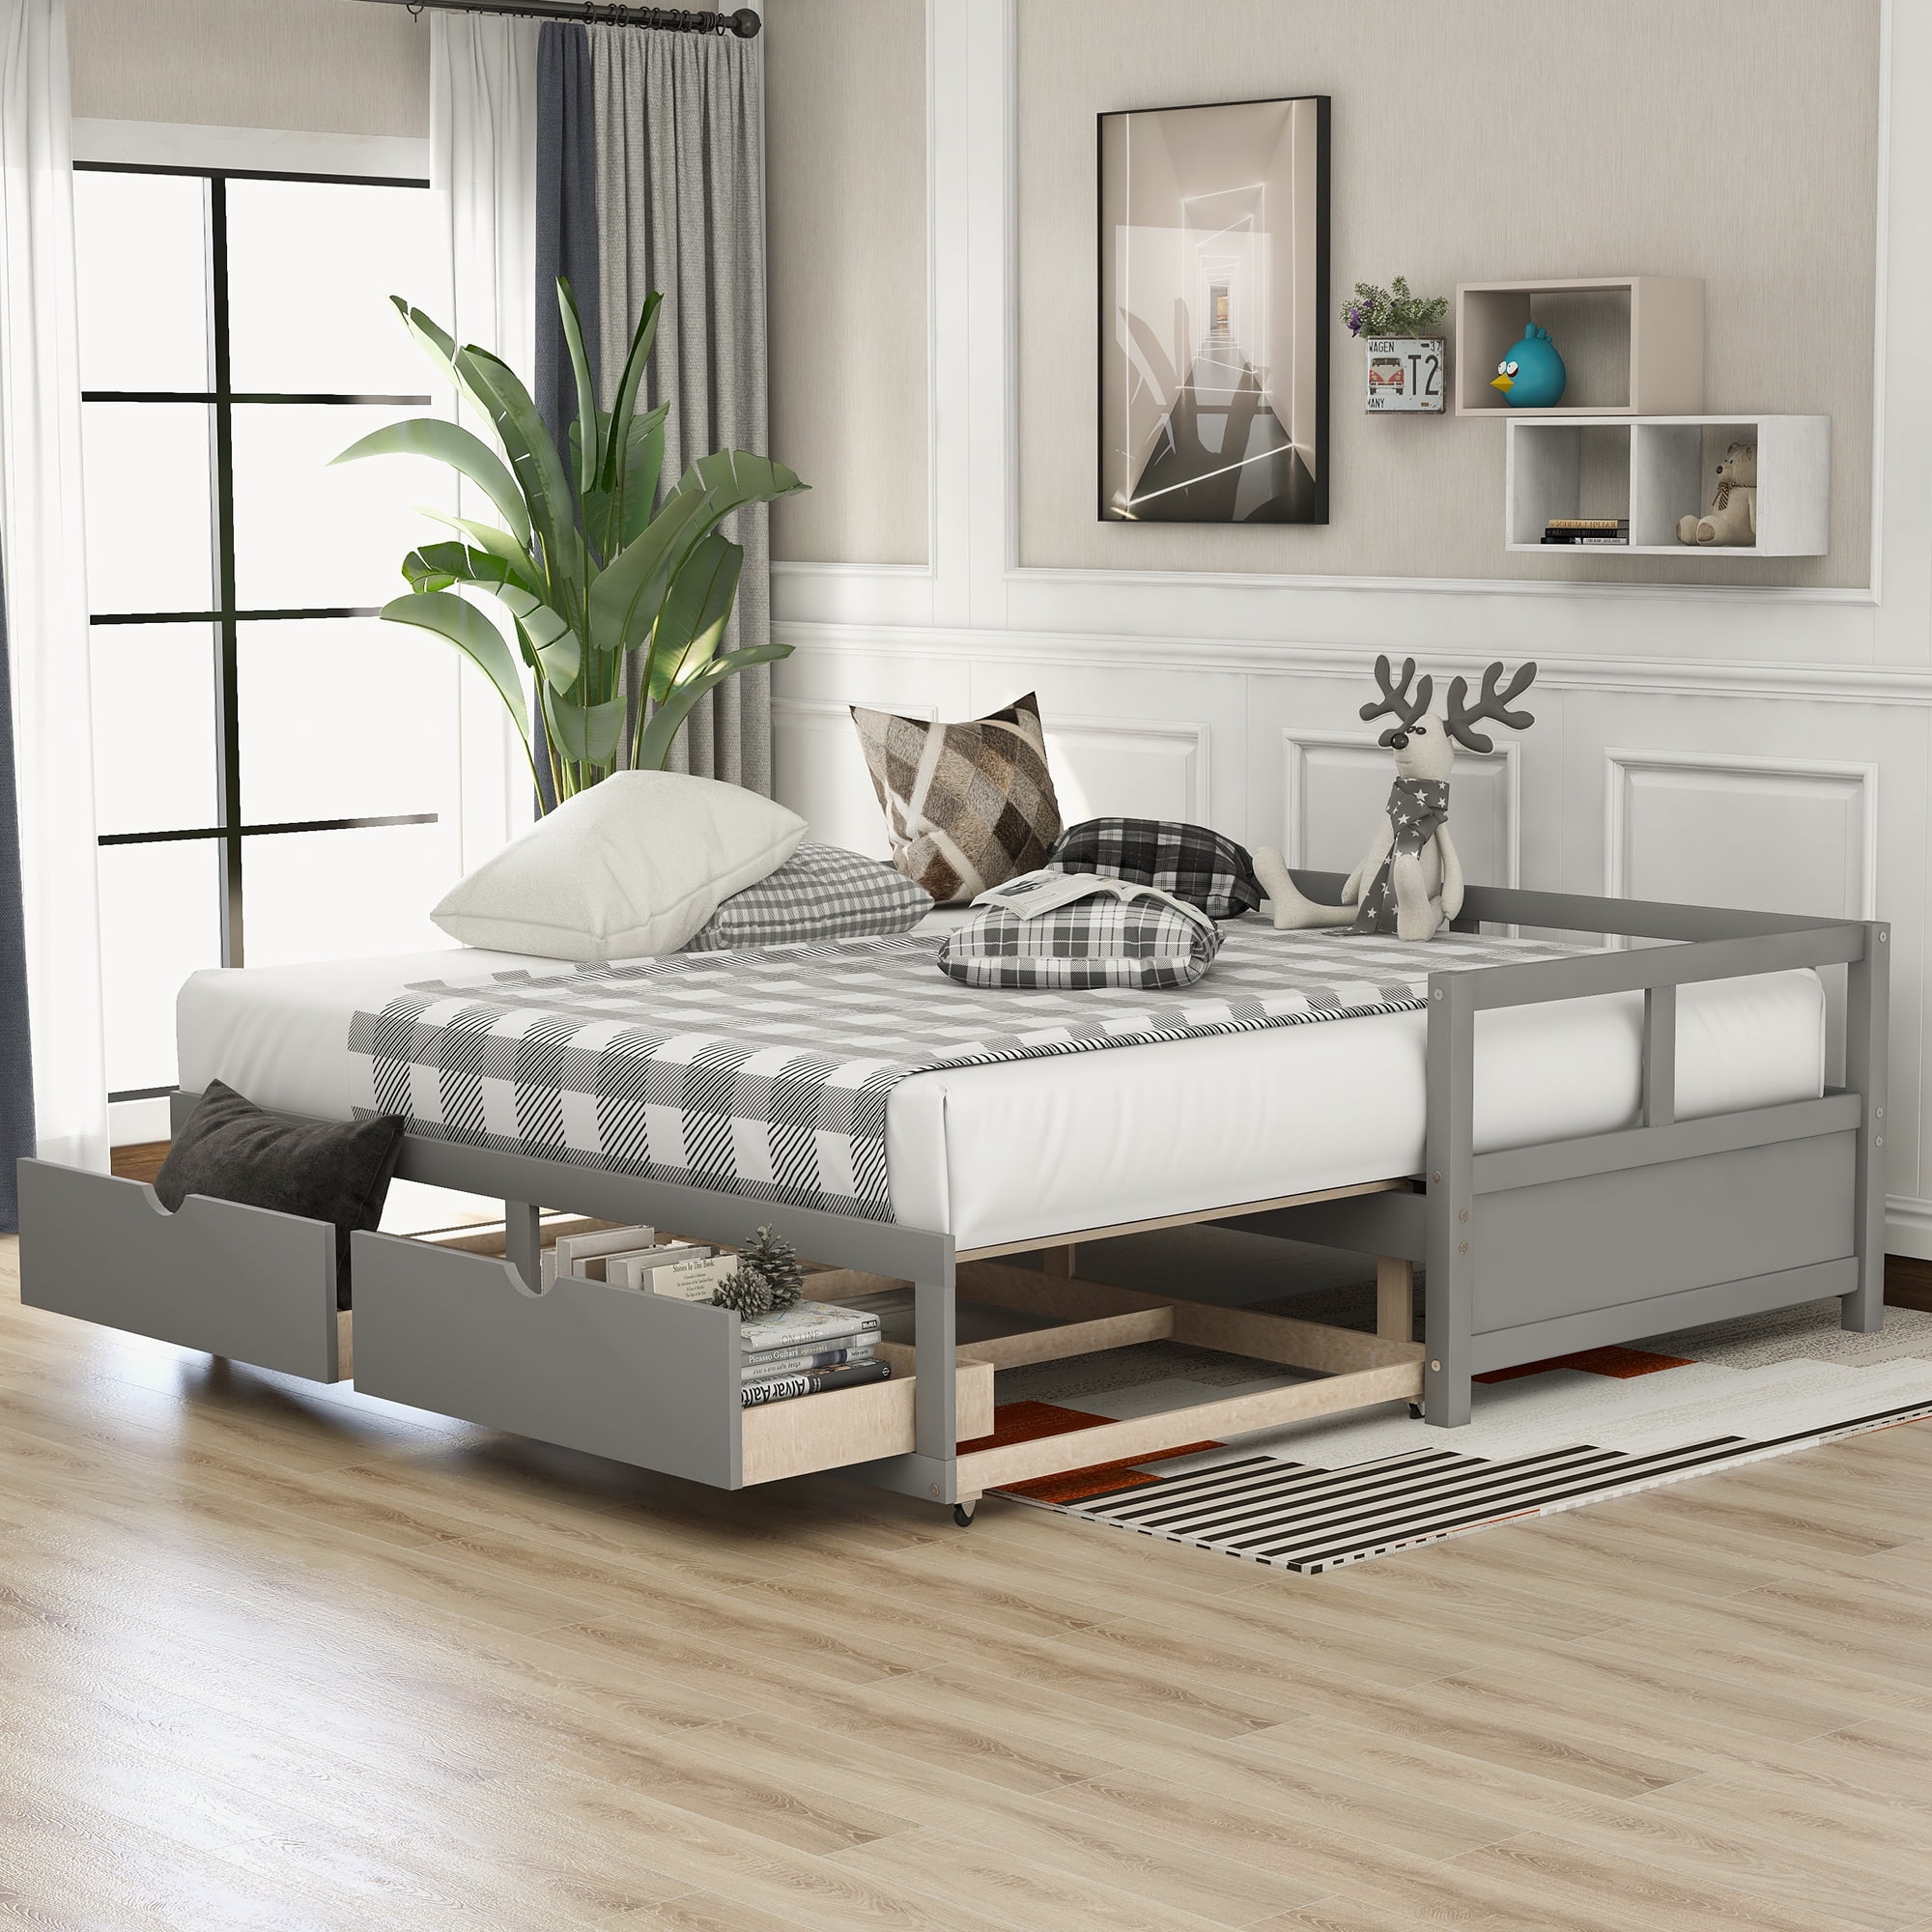 Twin Daybed With Two Storage Drawers, Twin Bed Frame That Looks Like A Couch